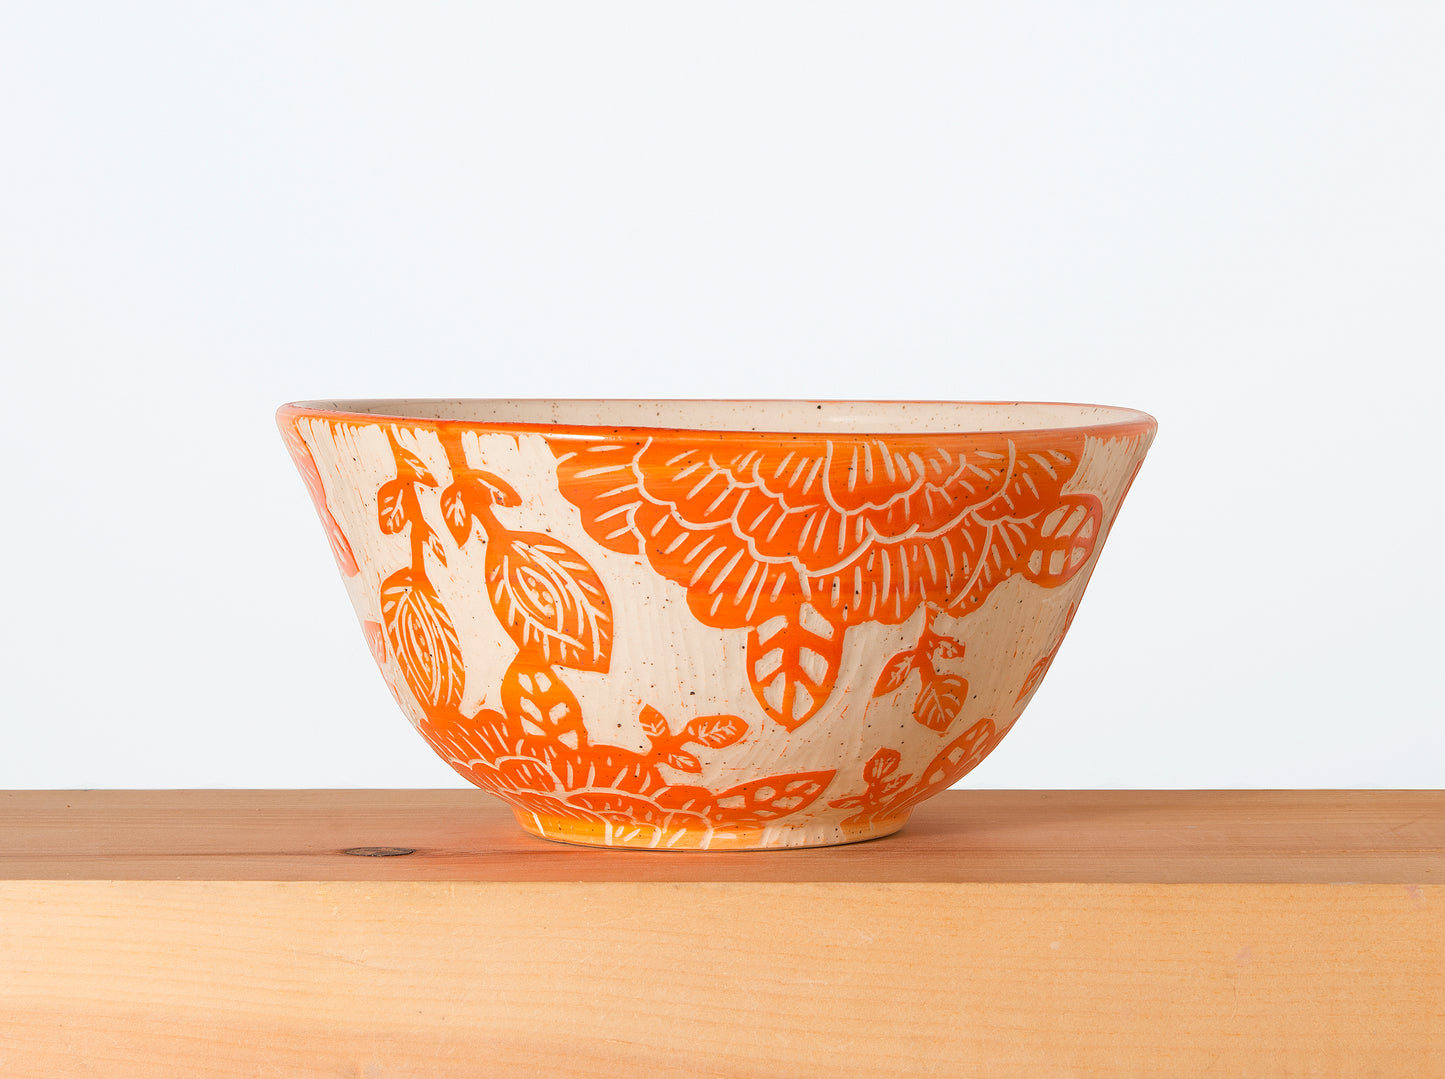 Serving Bowl with Orange Flowers